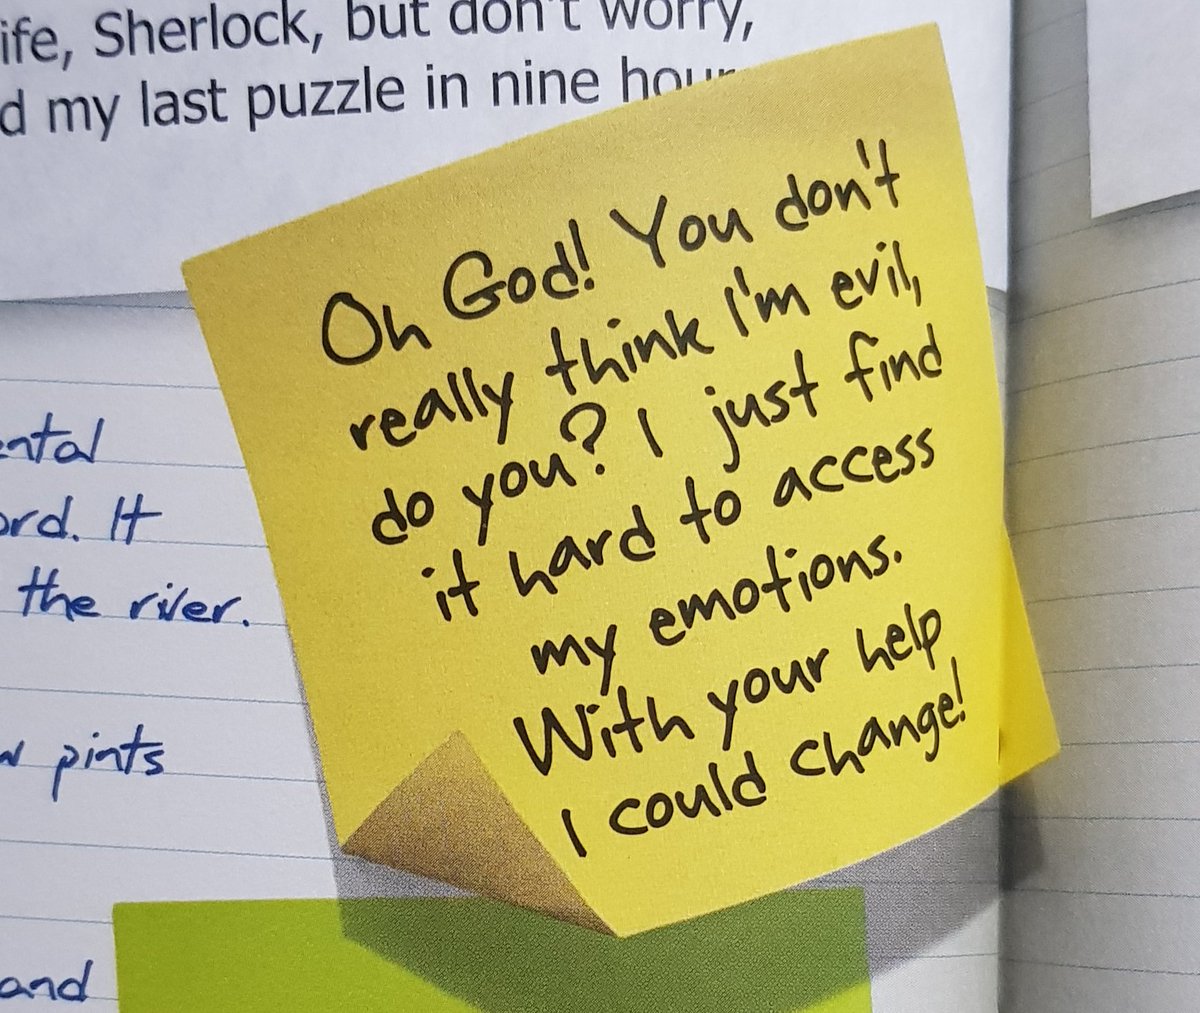 My favourite johnlock moments in the casebook: a thread(Yellow notes are Sherlock, green notes and the blue writing are John)